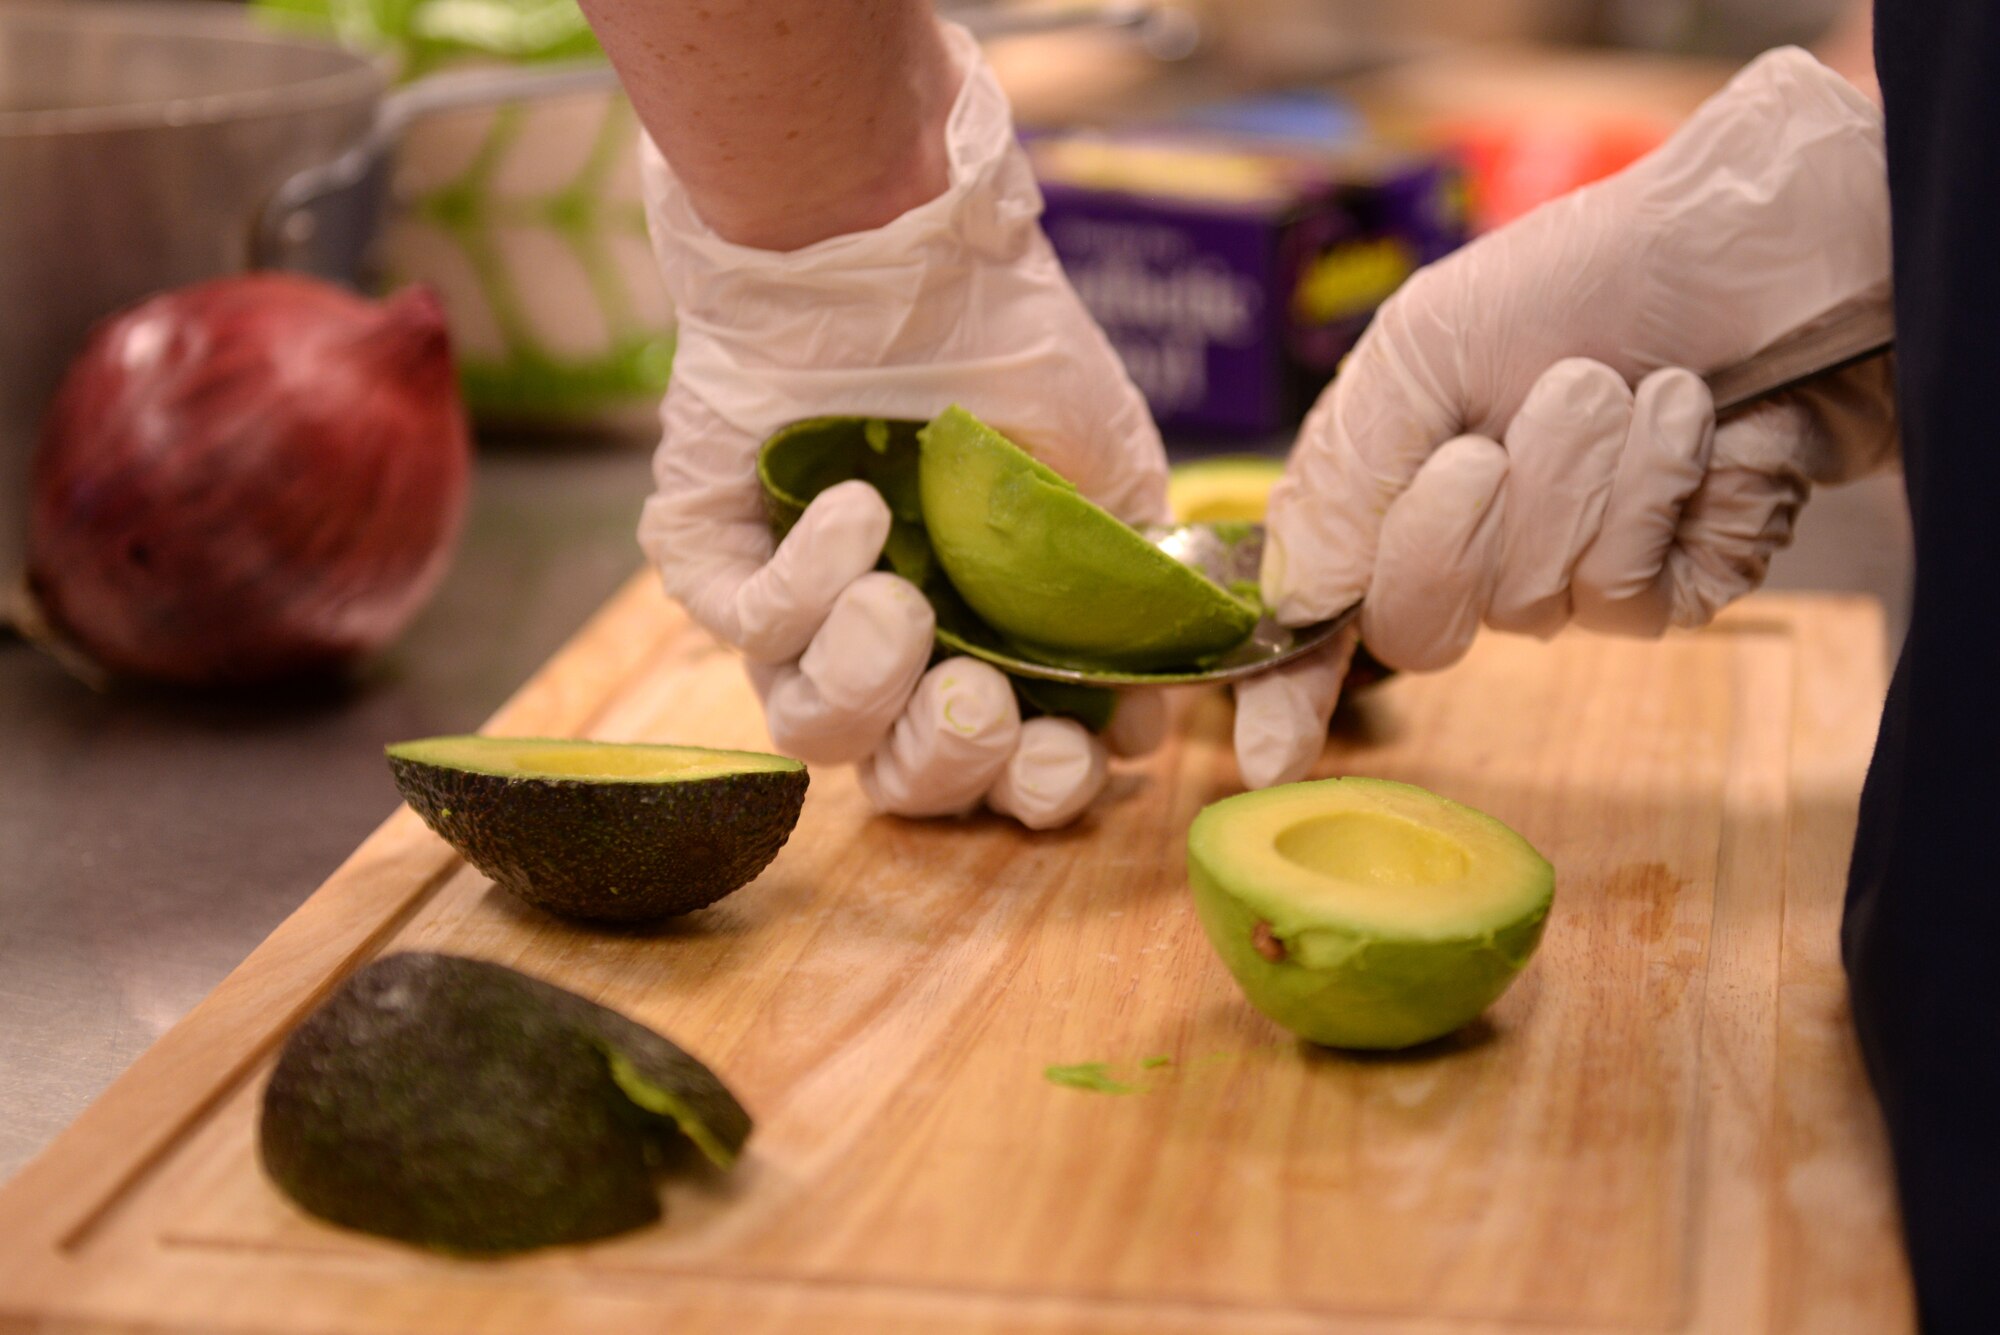 A competitor at the Taste of Luke cooking competition peels an avocado at Luke Air Force Base, Ariz., May 9, 2018. The cooking competition, like others that the 56th Force Support Squadron hosts throughout the year, required competitors to cook three different dishes, an appetizer, an entrée, and a dessert, to complete a three-course meal. (U.S. Air Force photo by Senior Airman Ridge Shan)